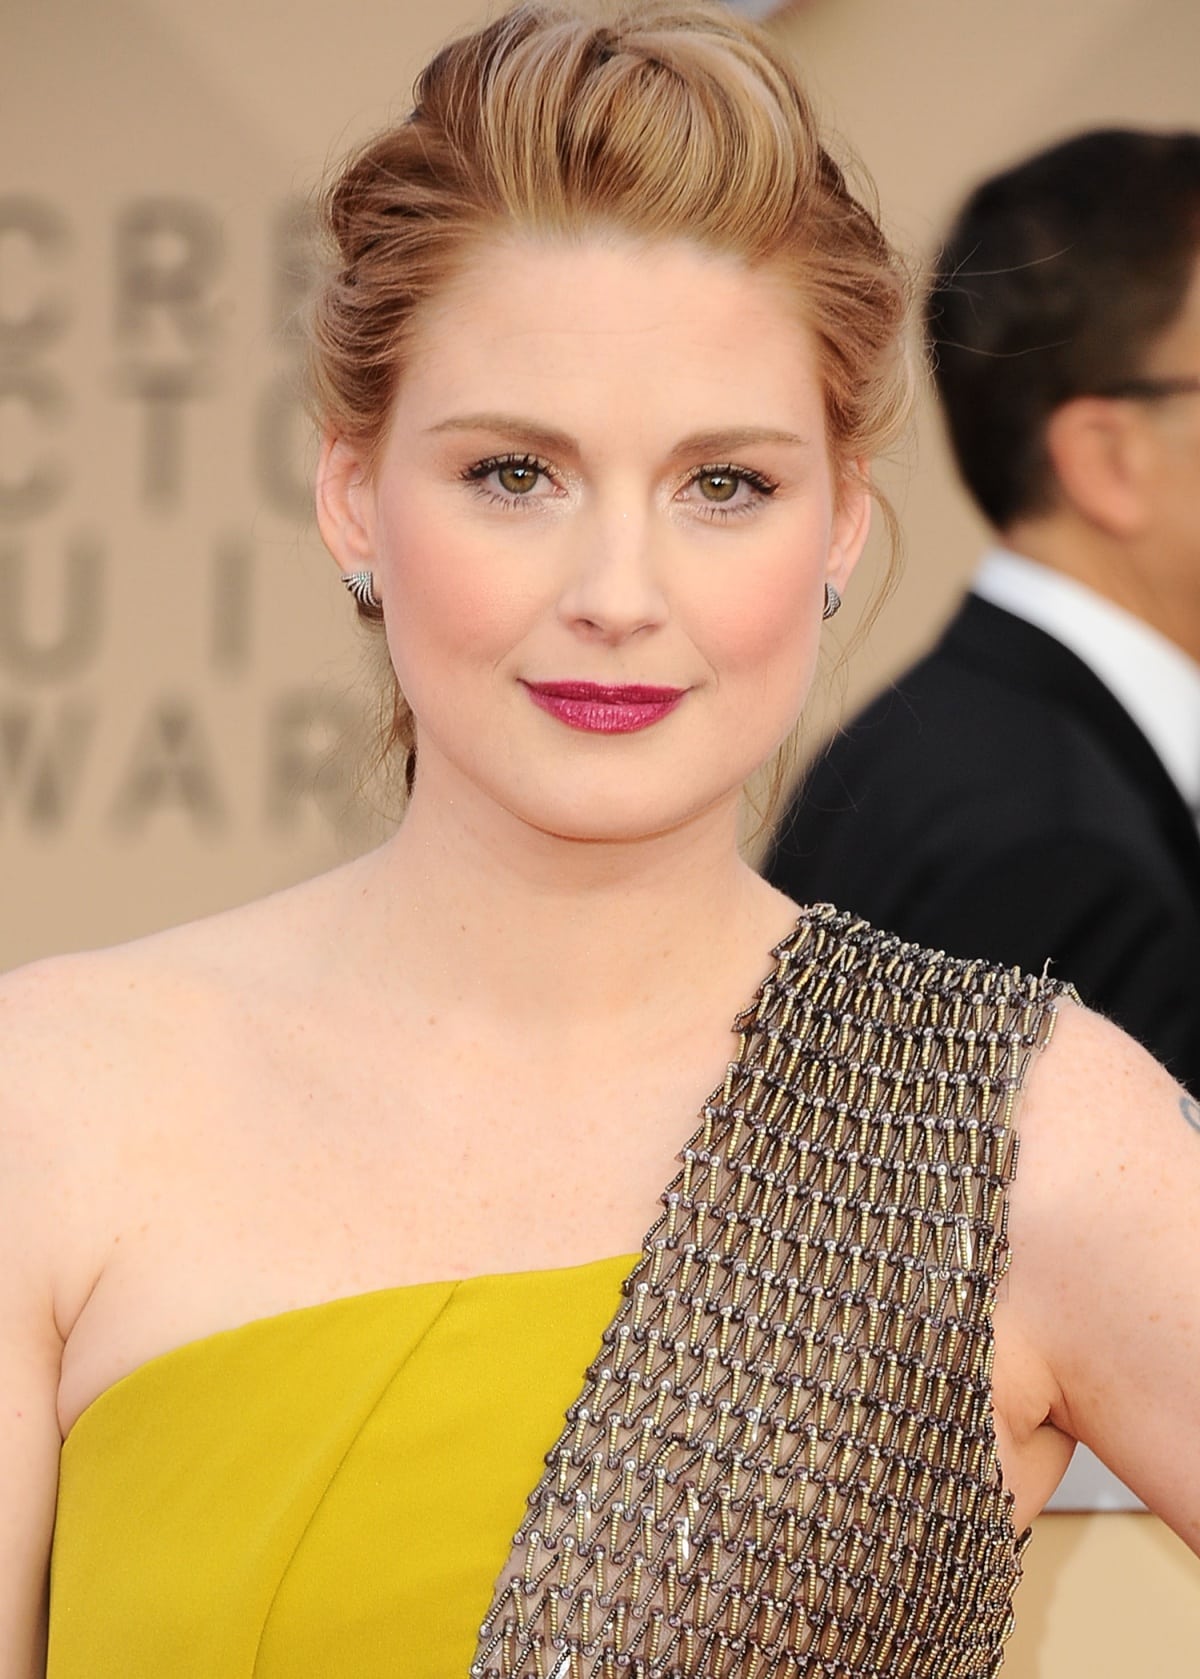 Alexandra Breckenridge shares a familial and professional bond with actor Michael Weatherly